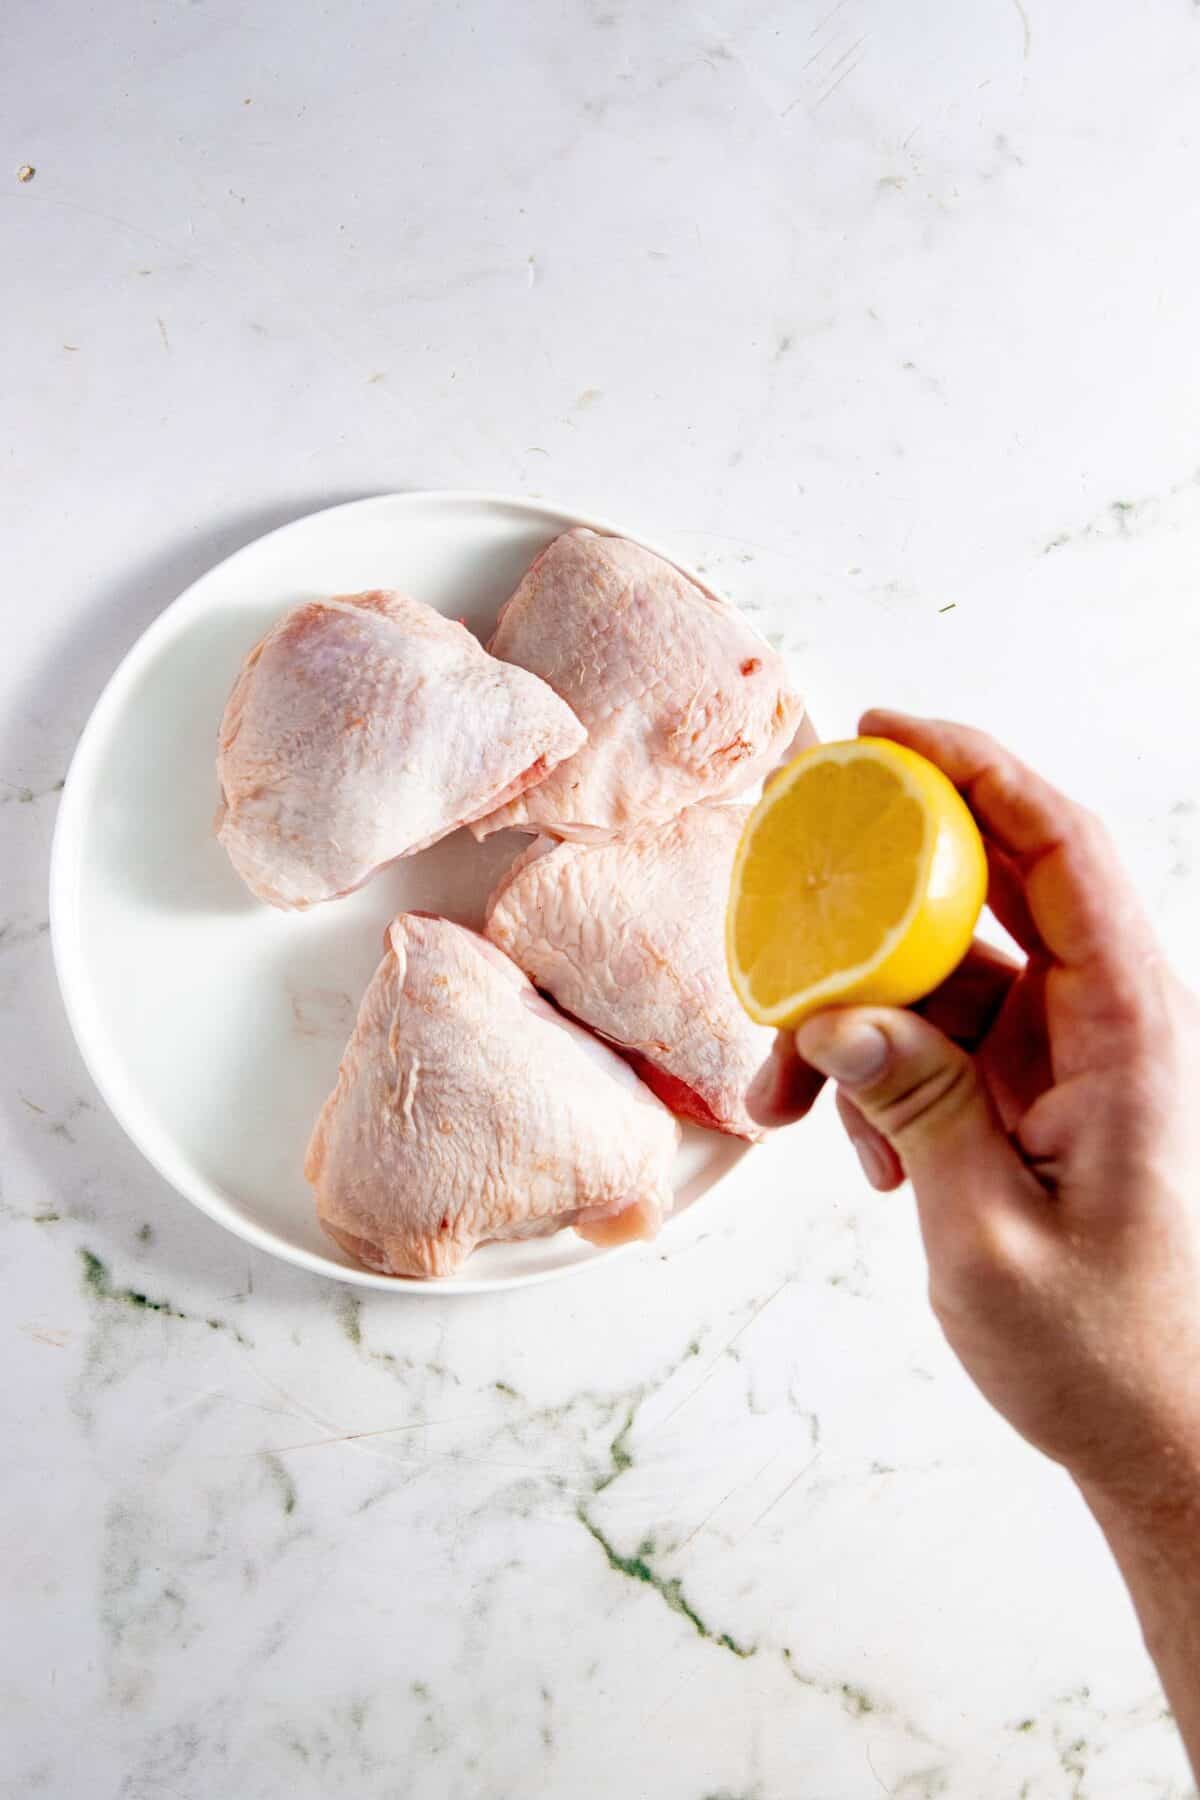 Hand squeezing lemon over chicken thighs.